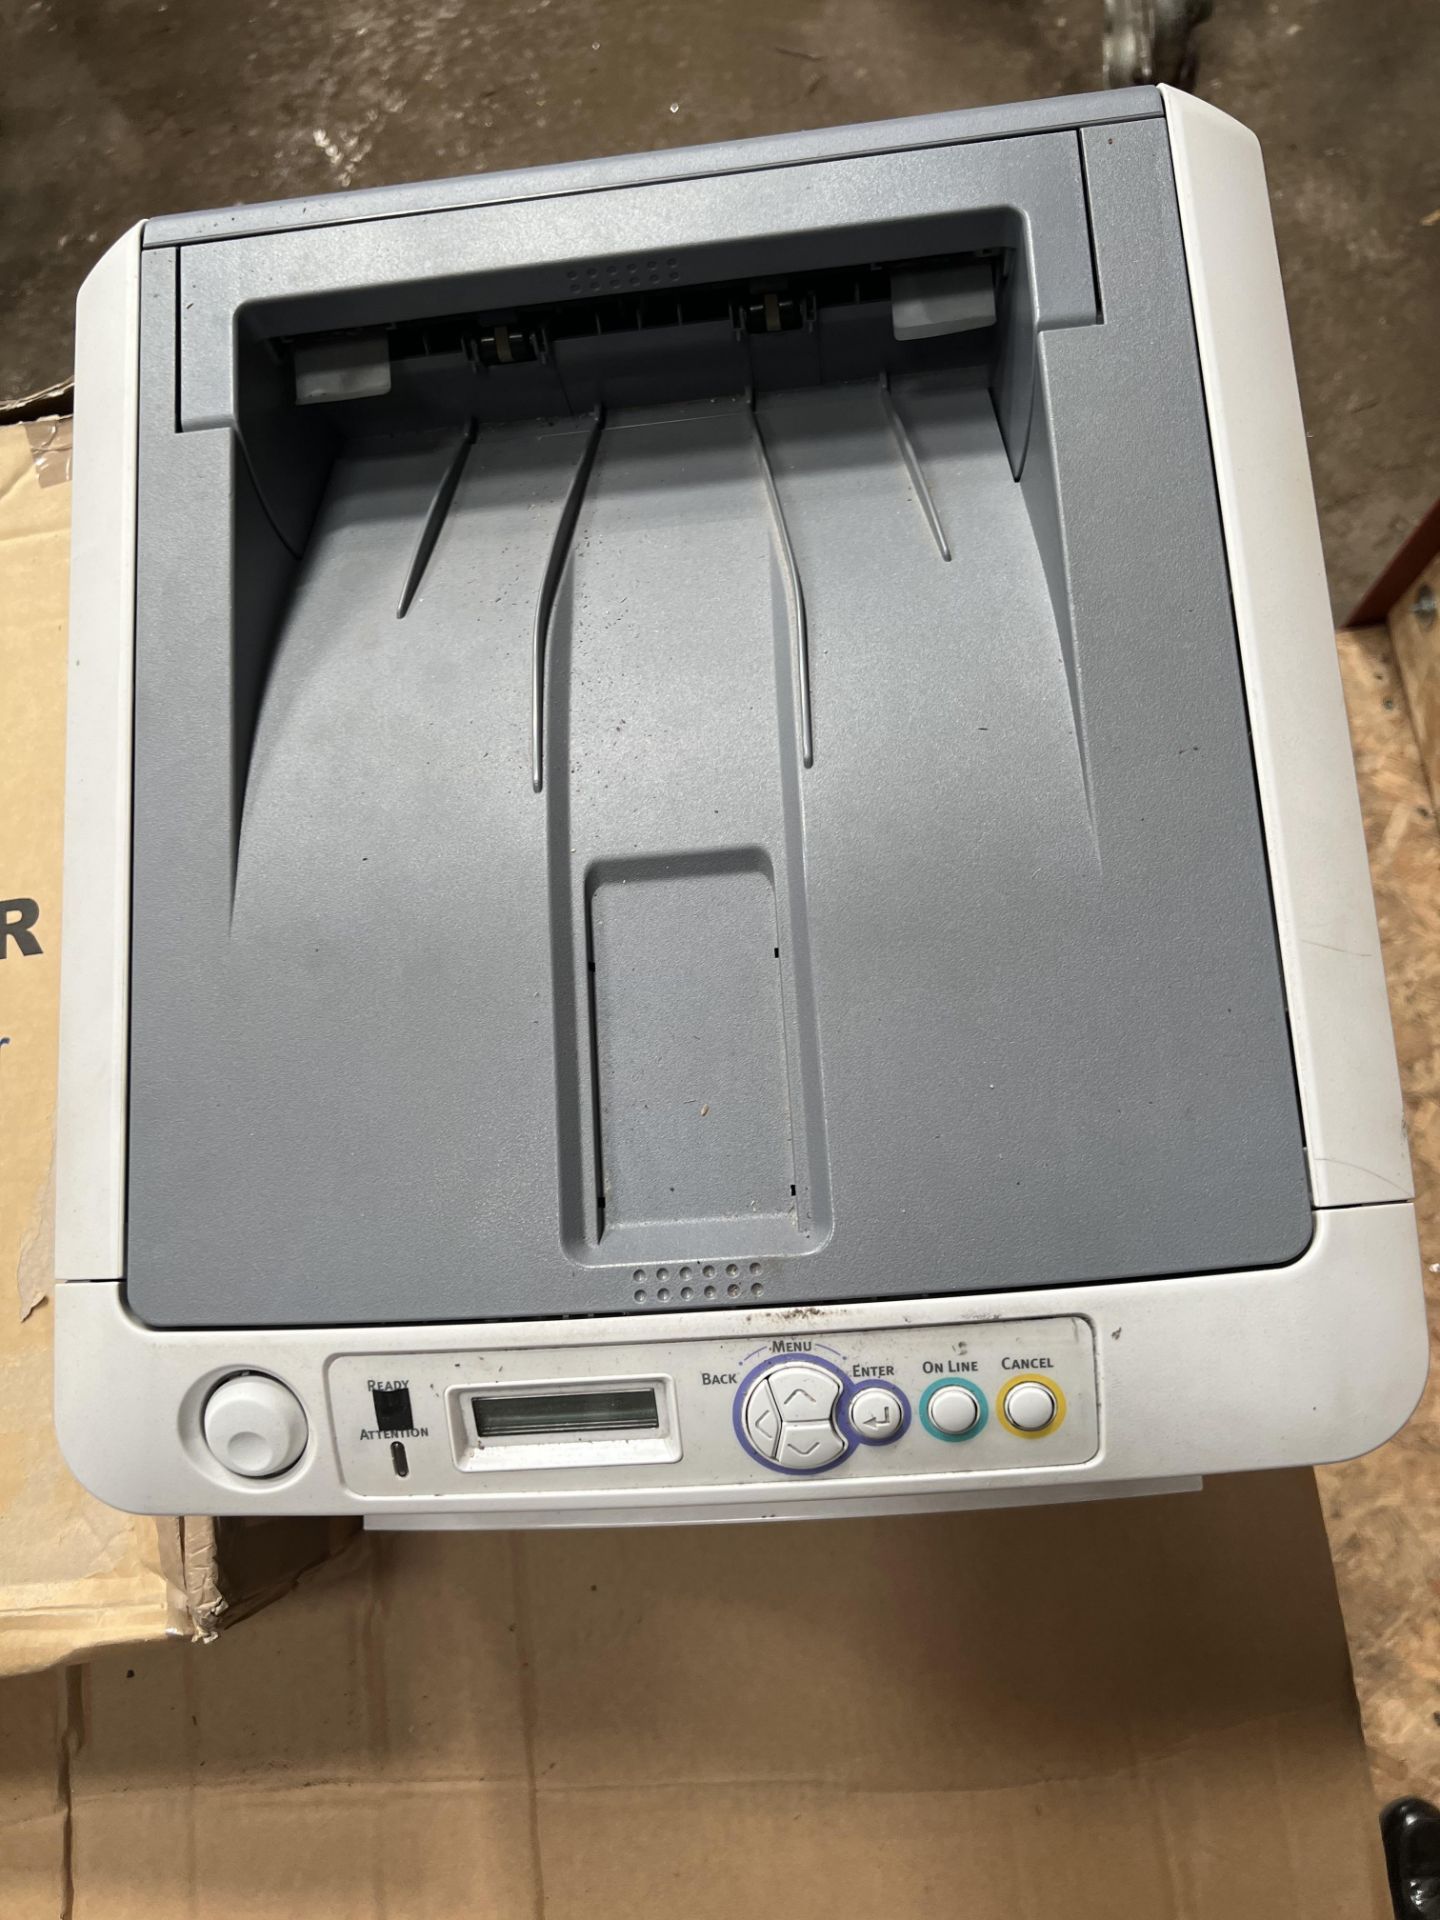 OKI PRINTER UNTESTED/UNCHECKED *PLUS VAT*, - Image 3 of 3